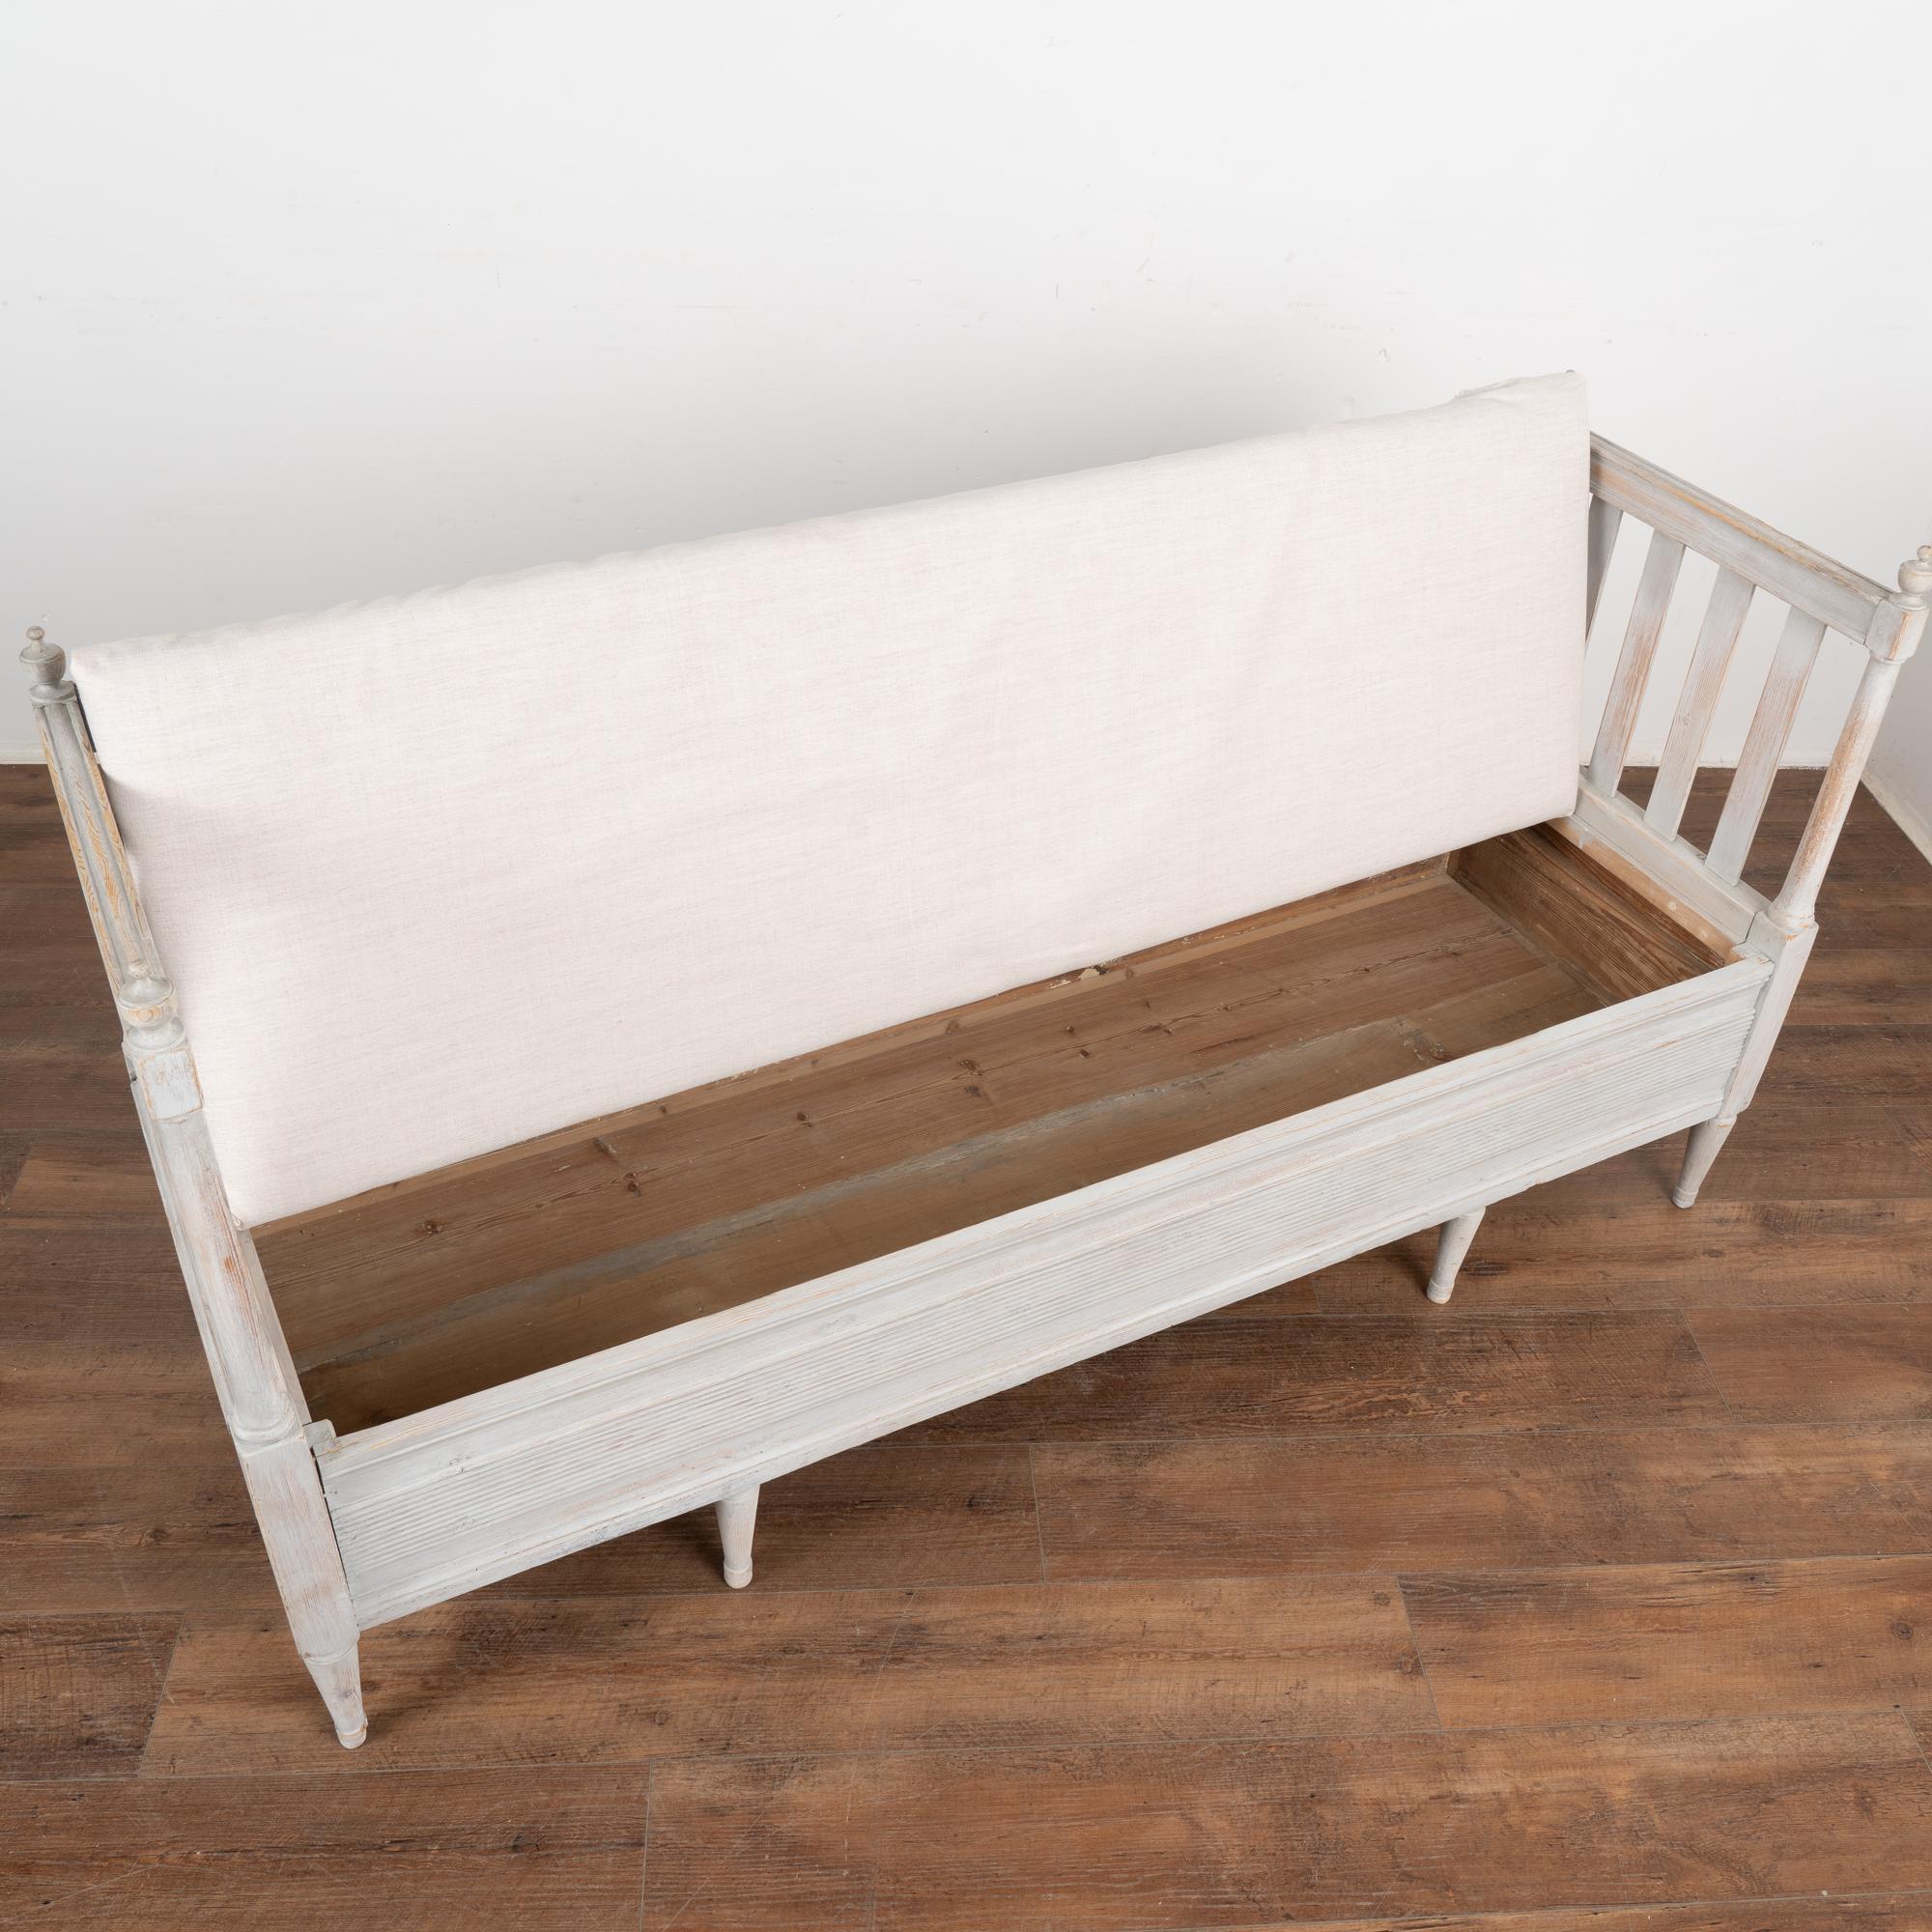 Swedish Gray Painted Gustavian Bench With Storage, Sweden circa 1840